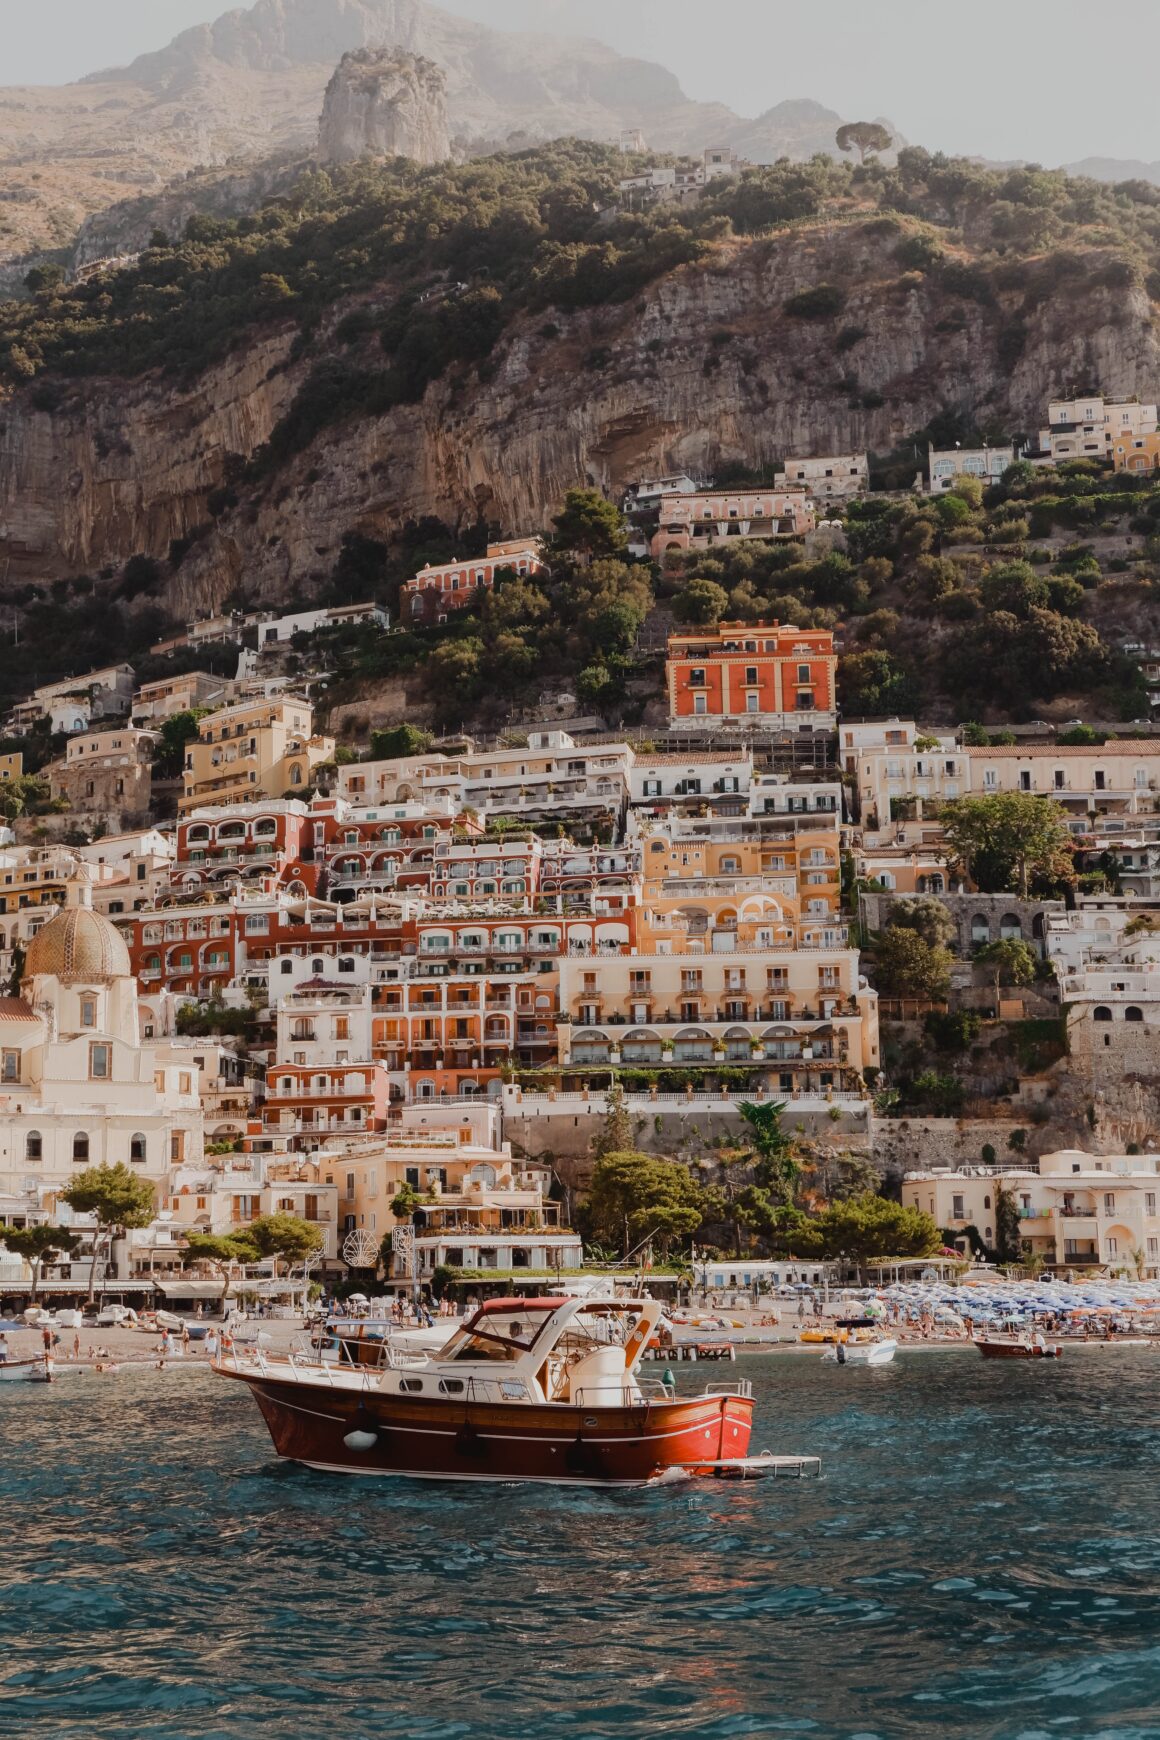 A boat floats in the water in the bay of Positano, Italy on the Amalfi Coast